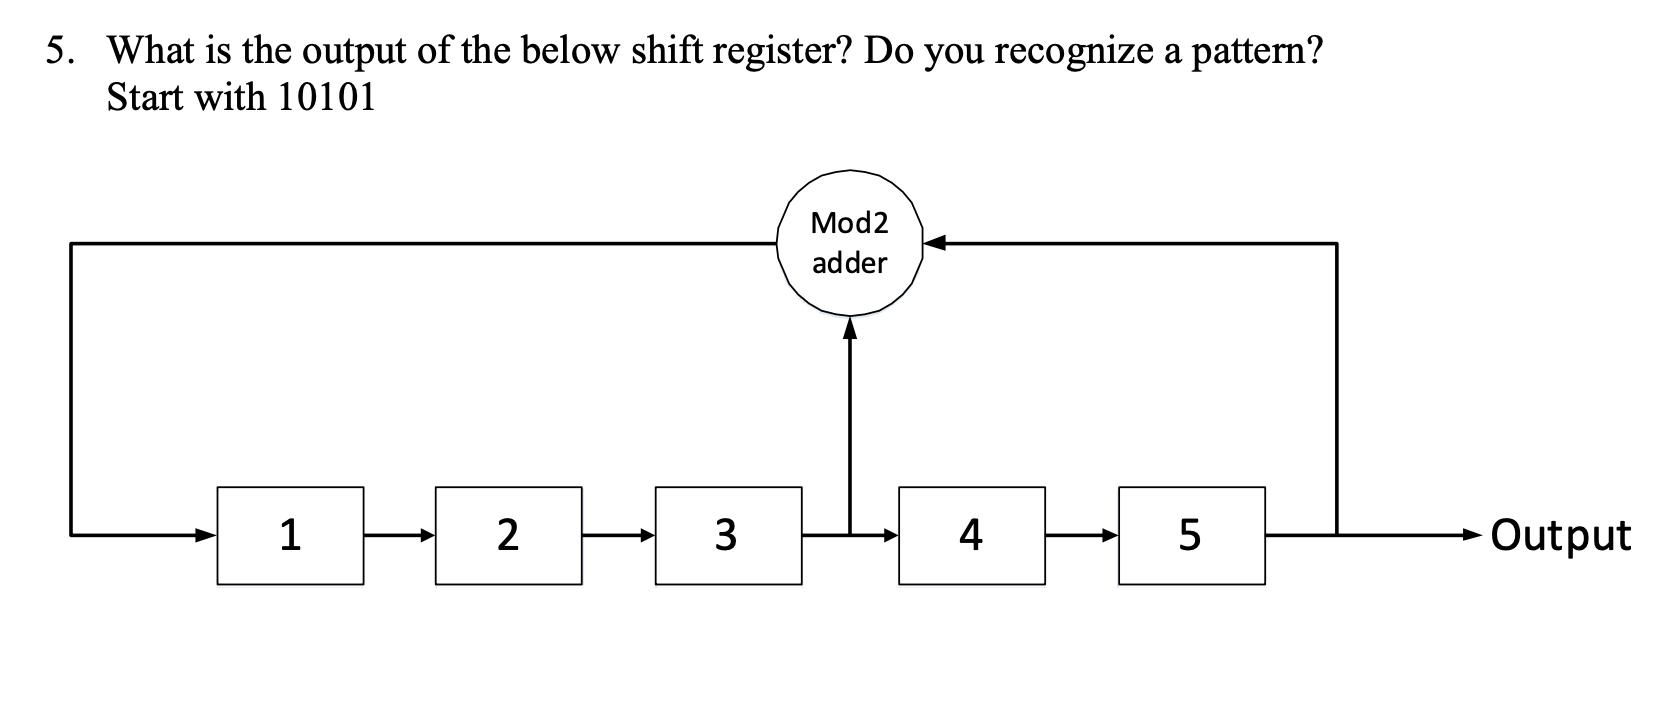 5. What is the output of the below shift register? Do you recognize a pattern? Start with 10101 1 2 3 Mod2